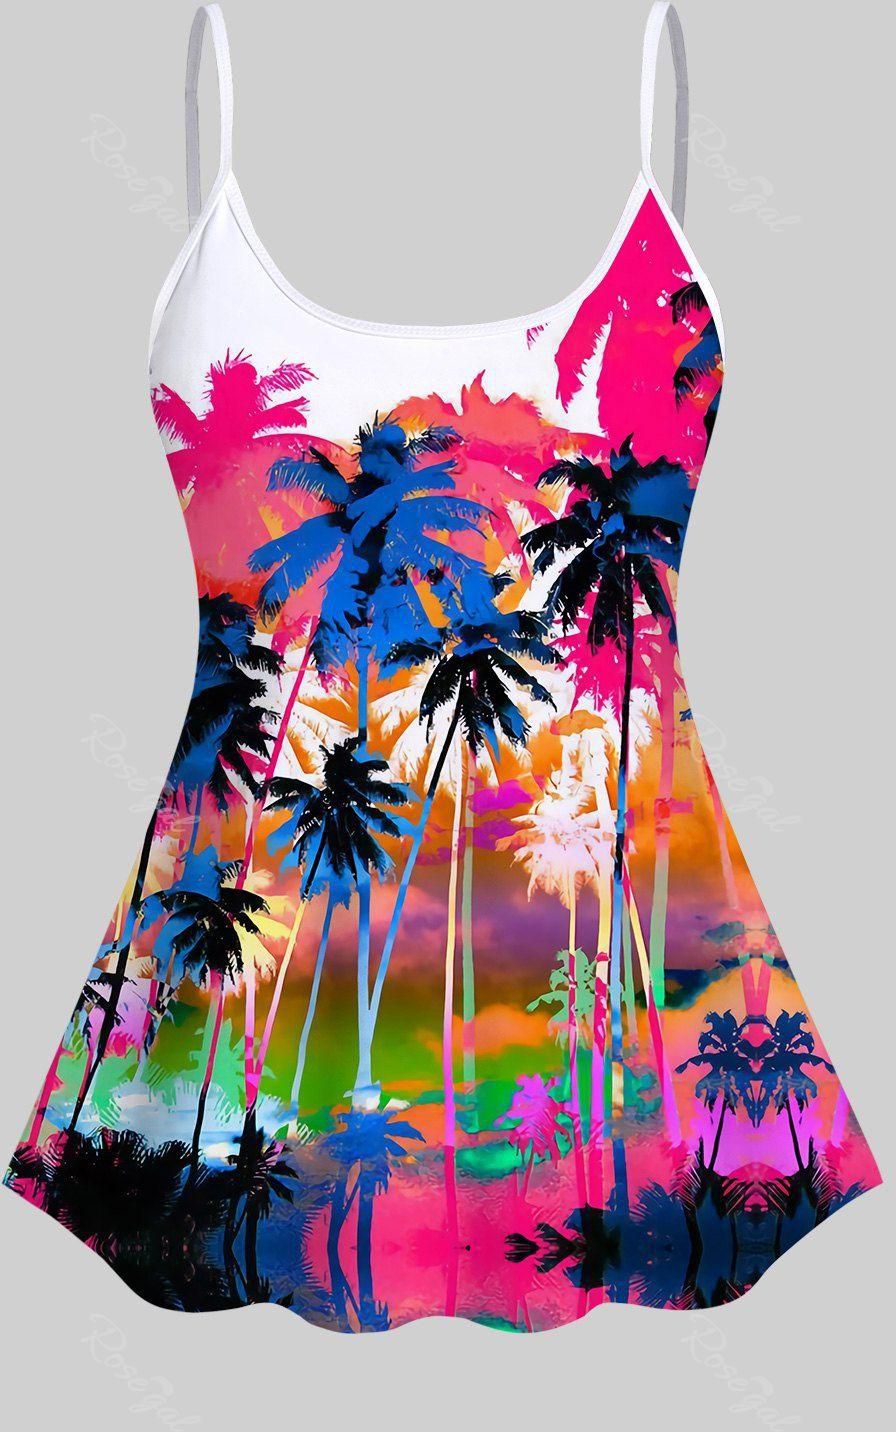 3D Colorful Coconut Tree Printed Spaghetti Strap Backless Tankini Top（Adjustable Shoulder Strap） - 5x